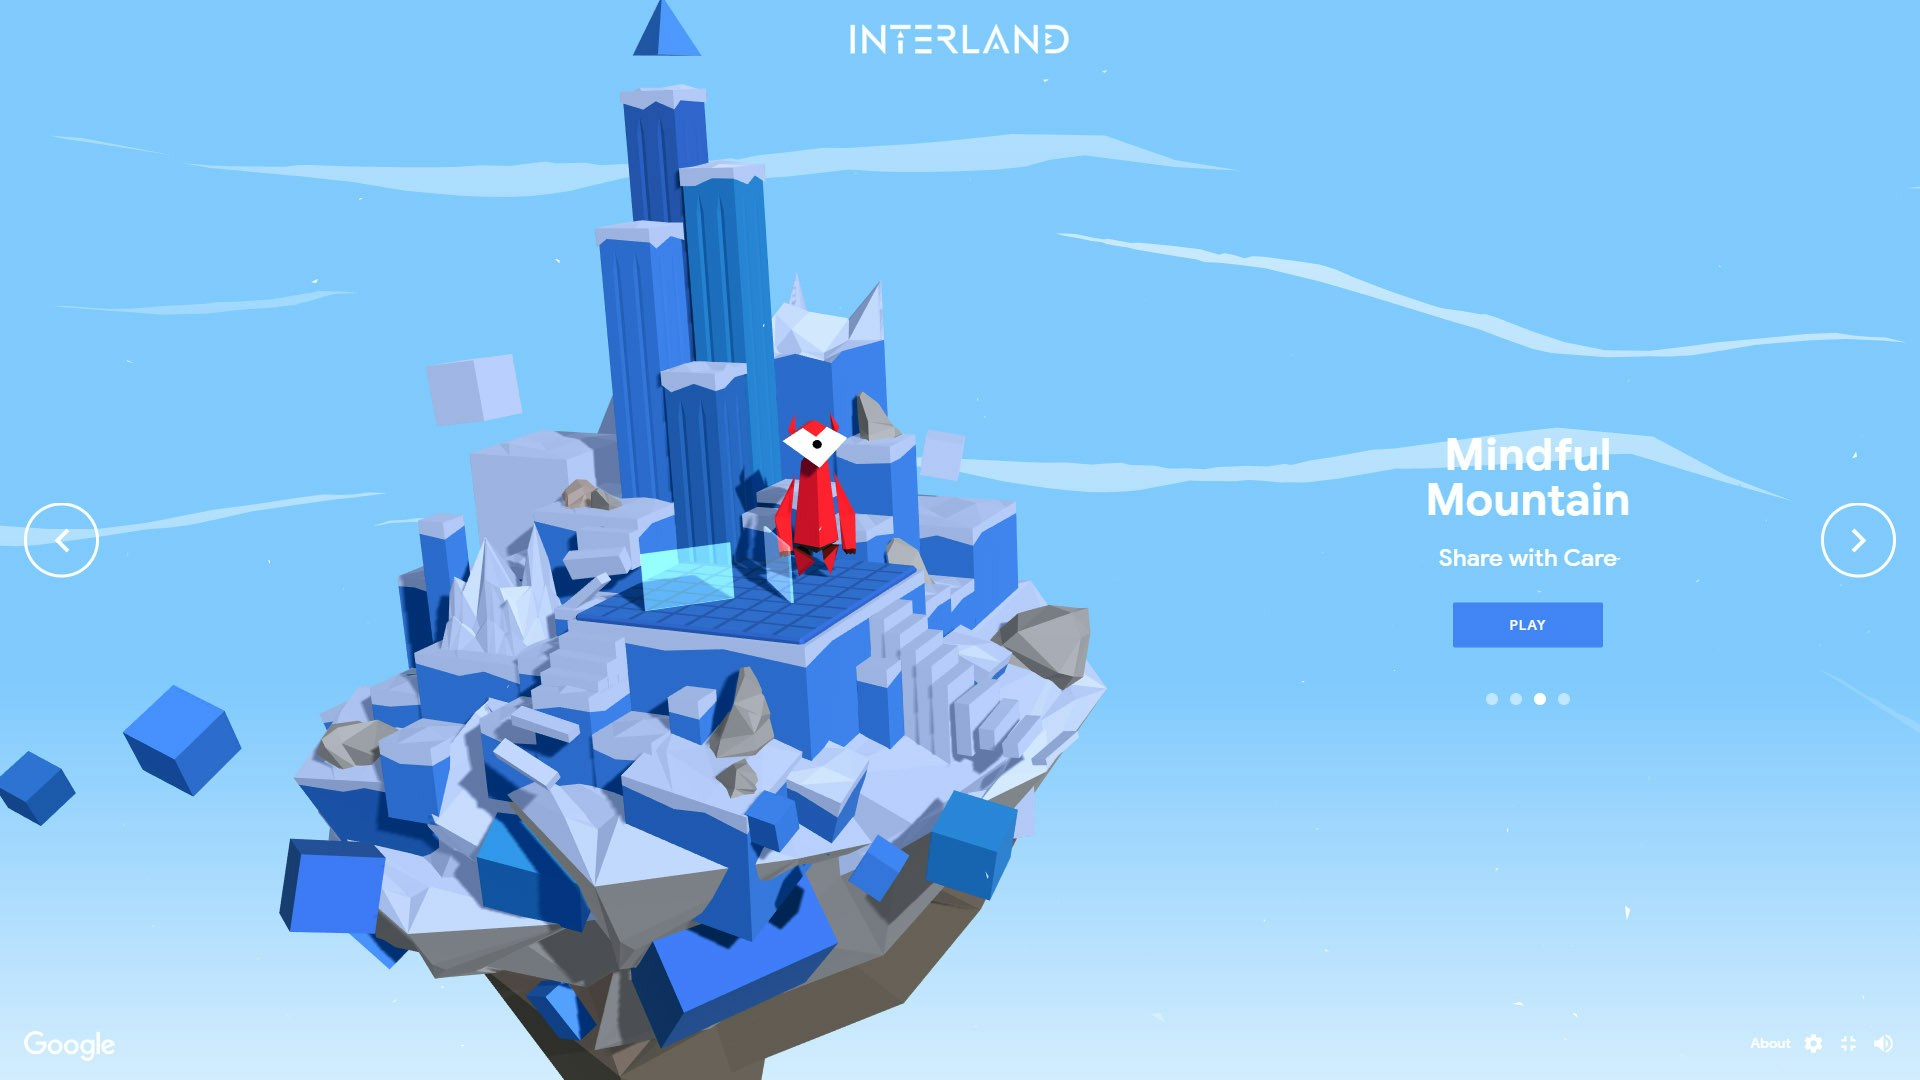 Google Interland Mindful mountain overview